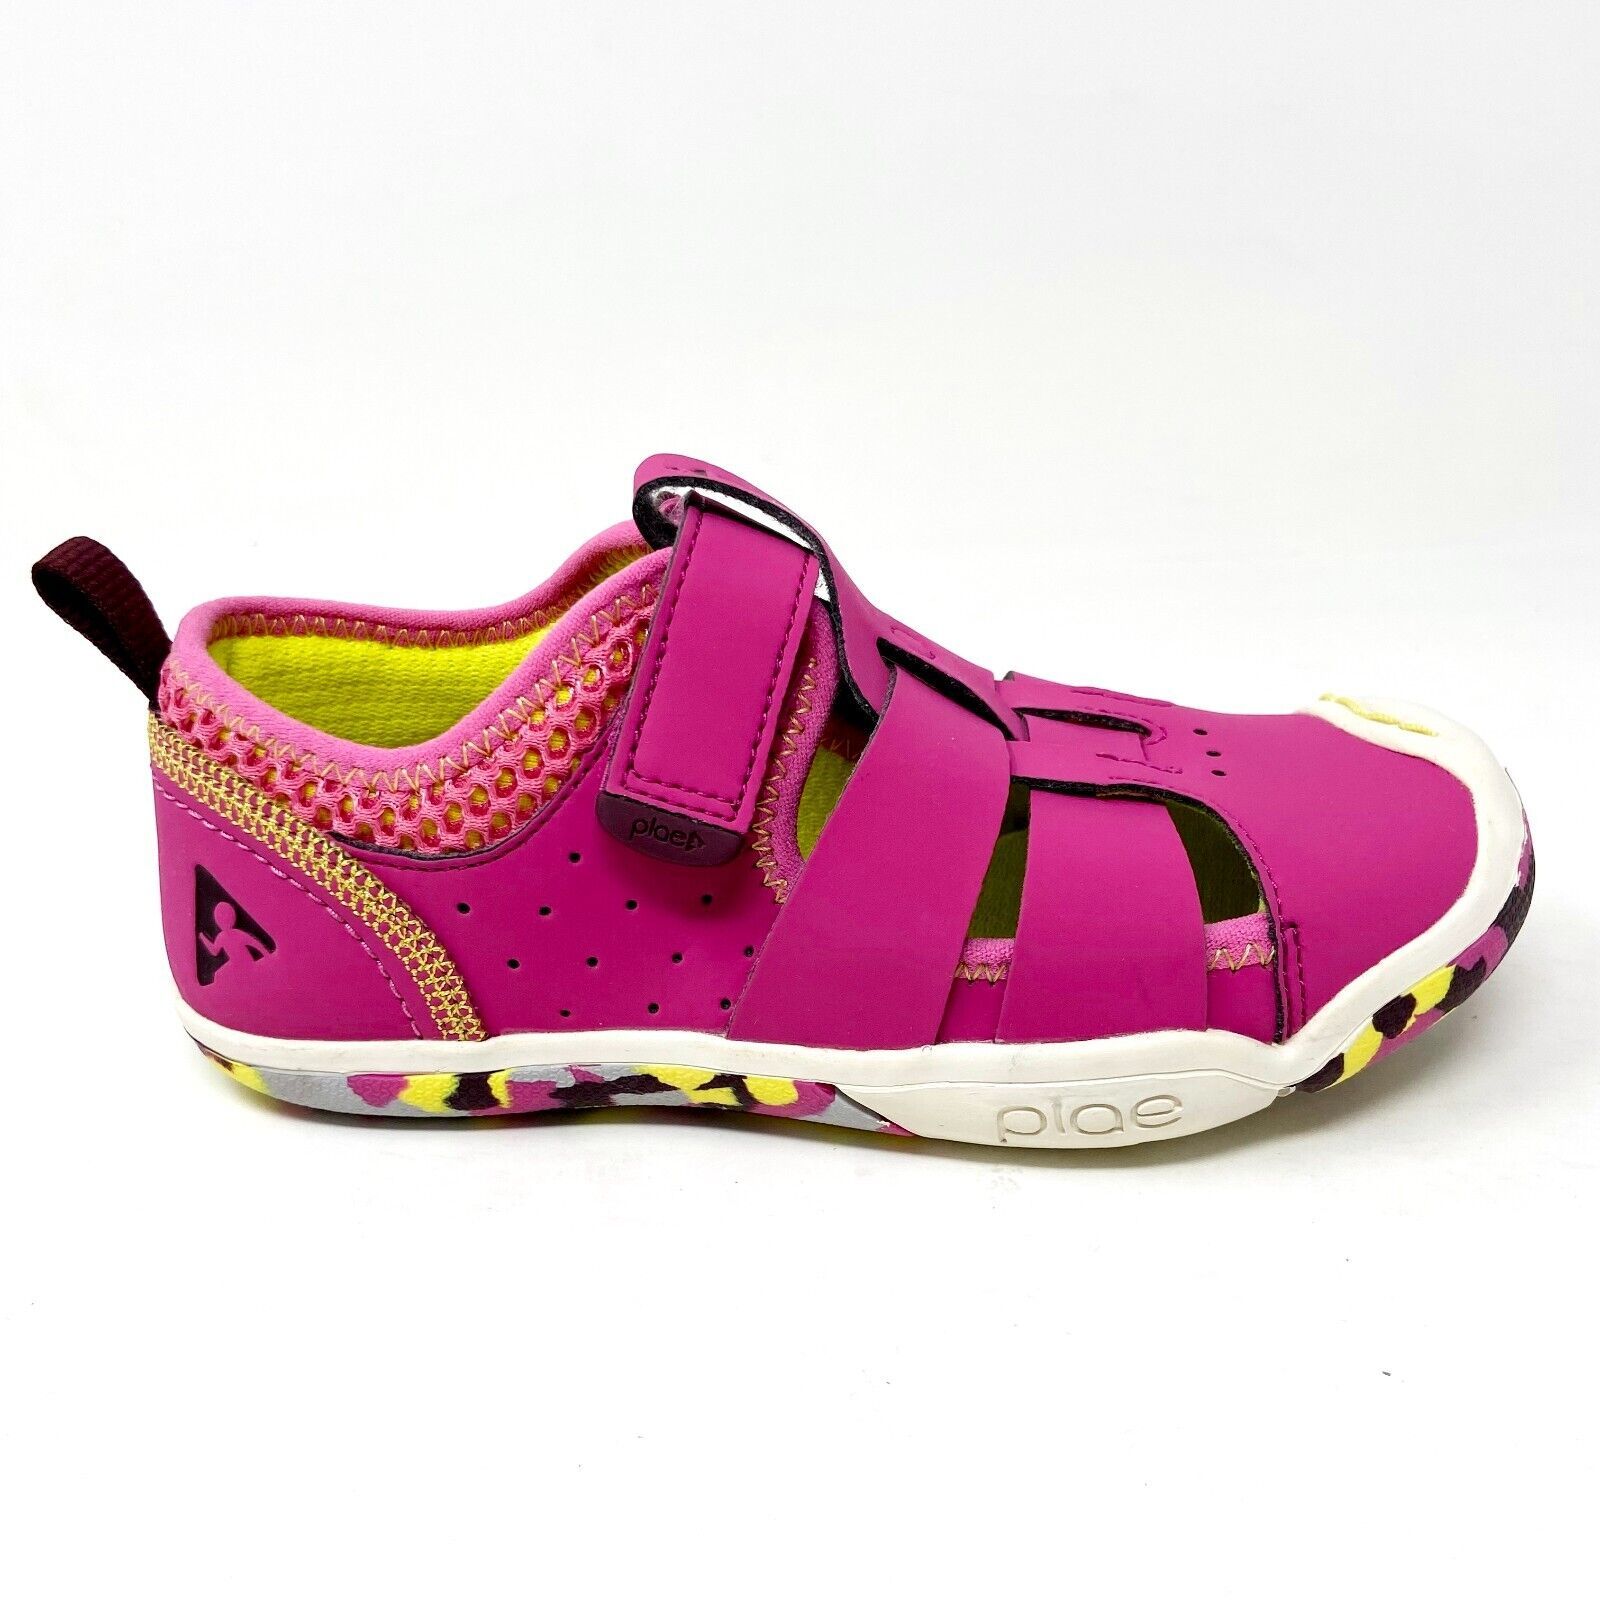 Primary image for Plae Sam 2.0 Electric Fuchsia Pink Girls Breathable Kids Shoes 106030 639